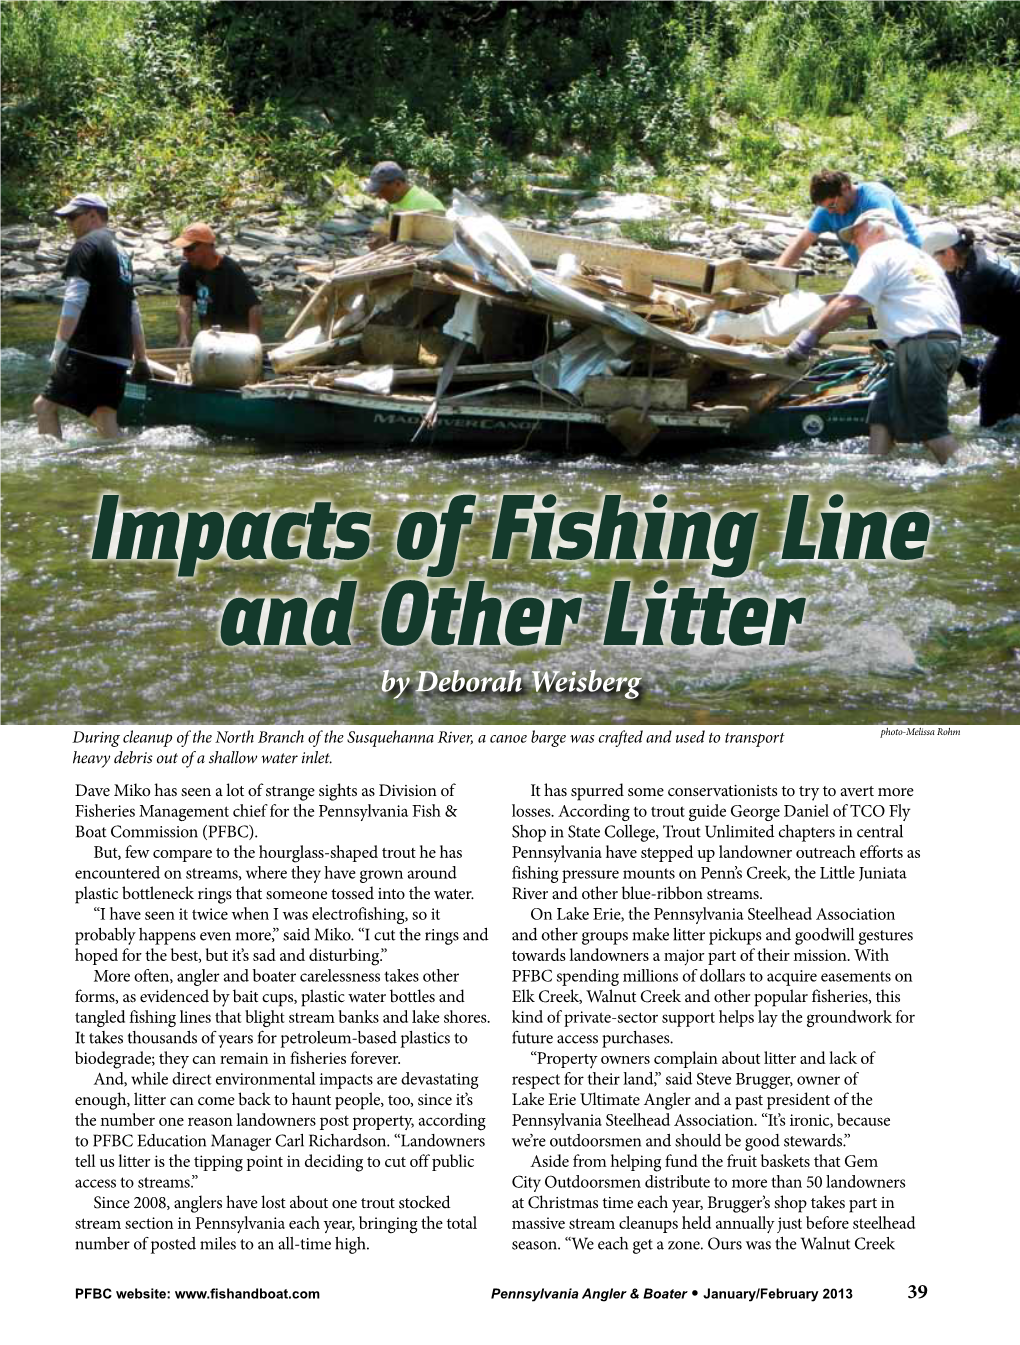 Impacts of Fishing Line and Other Litter by Deborah Weisberg